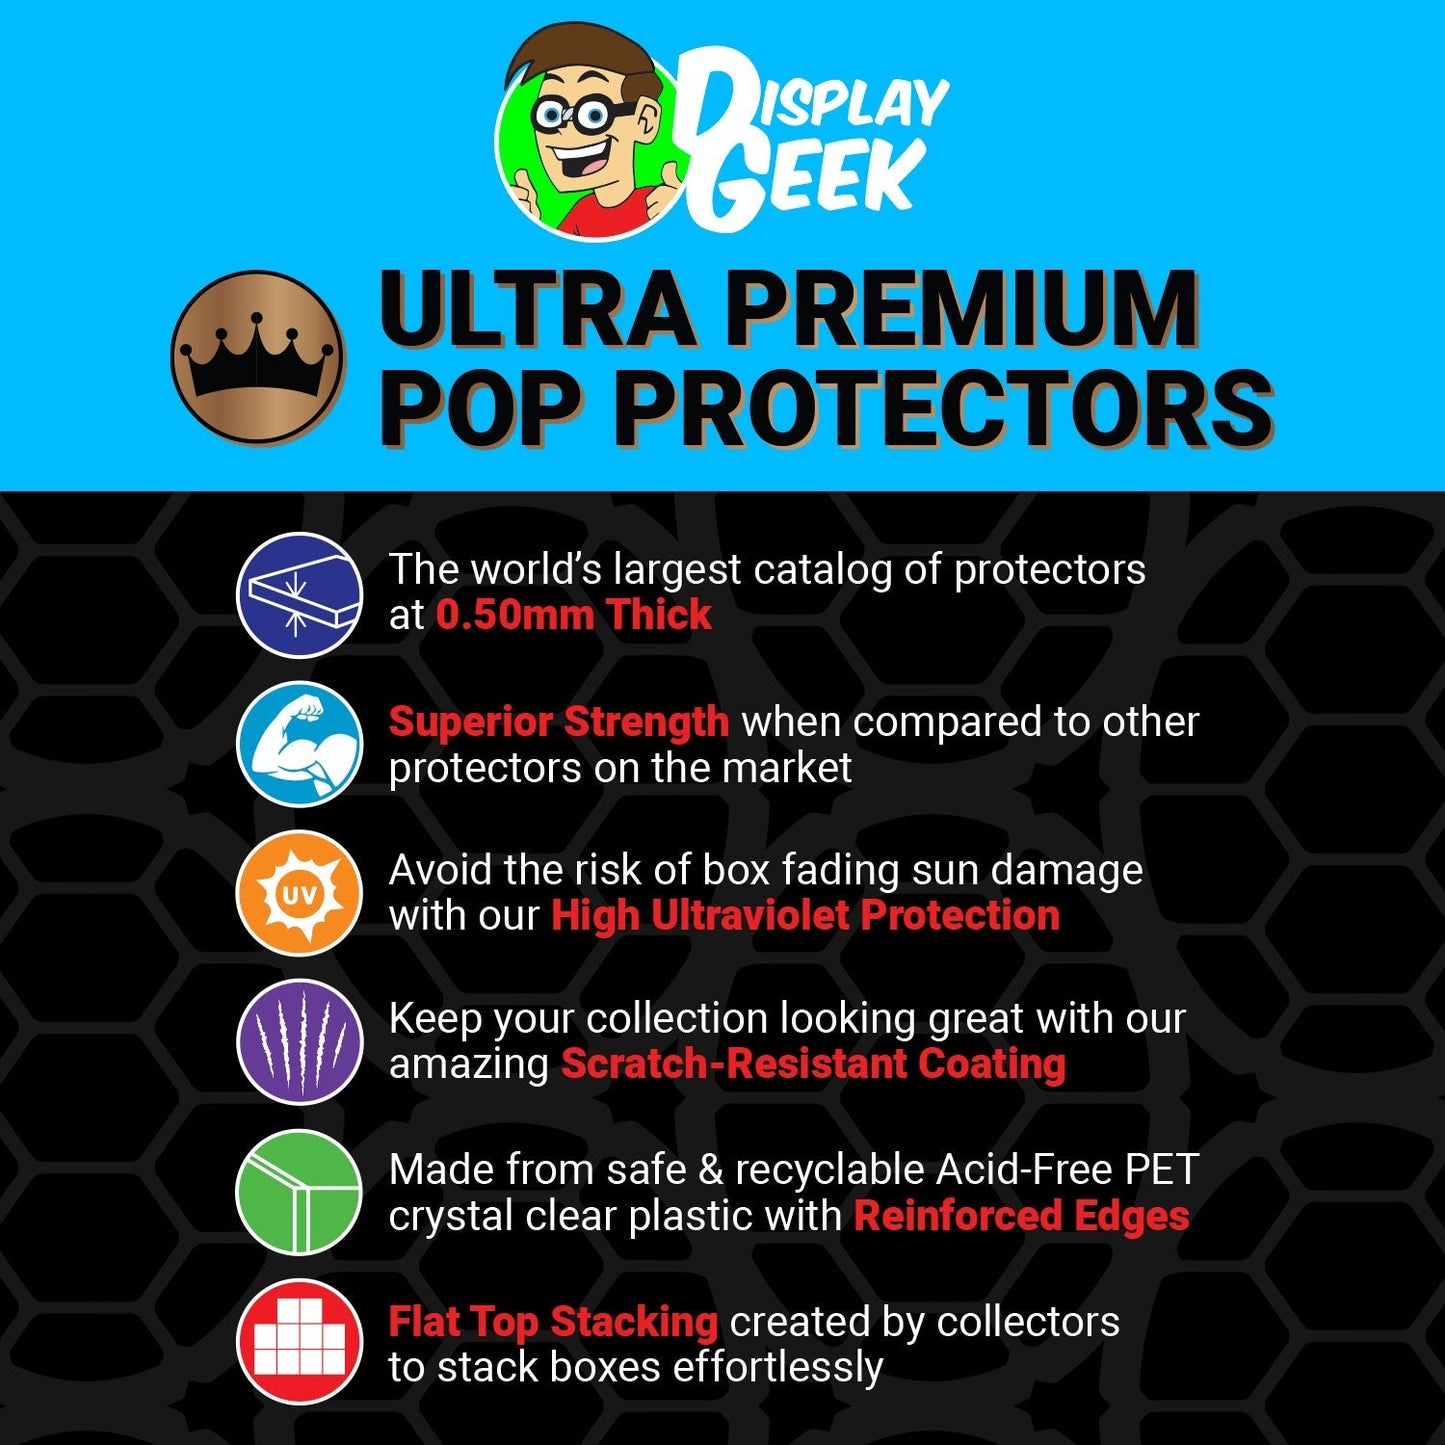 Pop Protector for Shazam #14 Funko Pop Comic Covers - PPG Pop Protector Guide Search Created by Display Geek